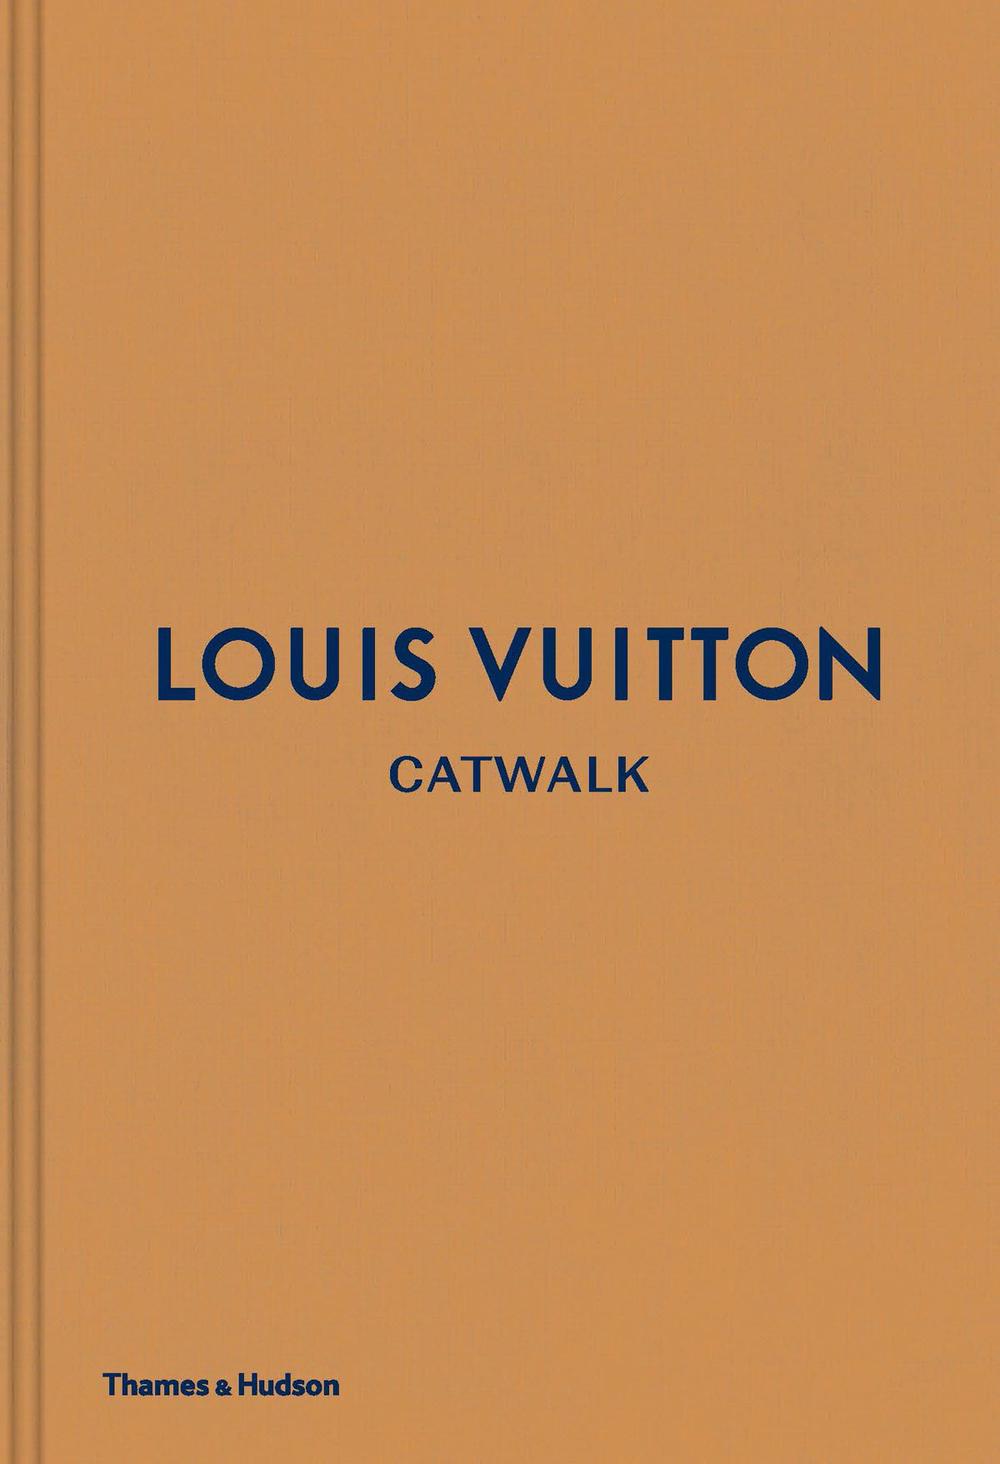 Louis Vuitton Catwalk by Jo Ellison, Hardcover, 9780500519943 | Buy online at The Nile